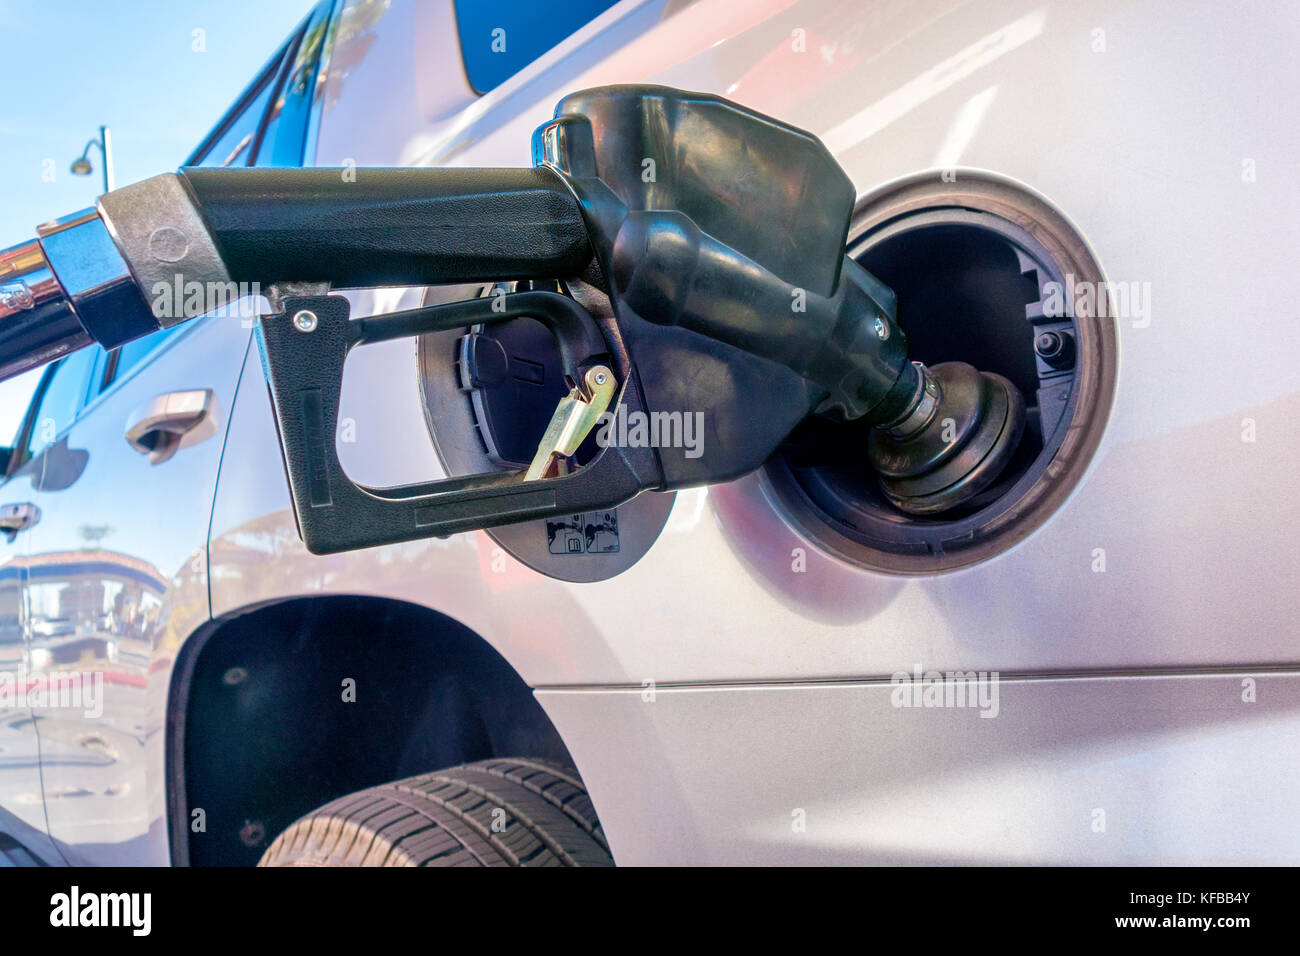 Gas pump nozzle. Petrol pump nozzle with vapor recovery. Fueling a big SUV in the US. Stock Photo